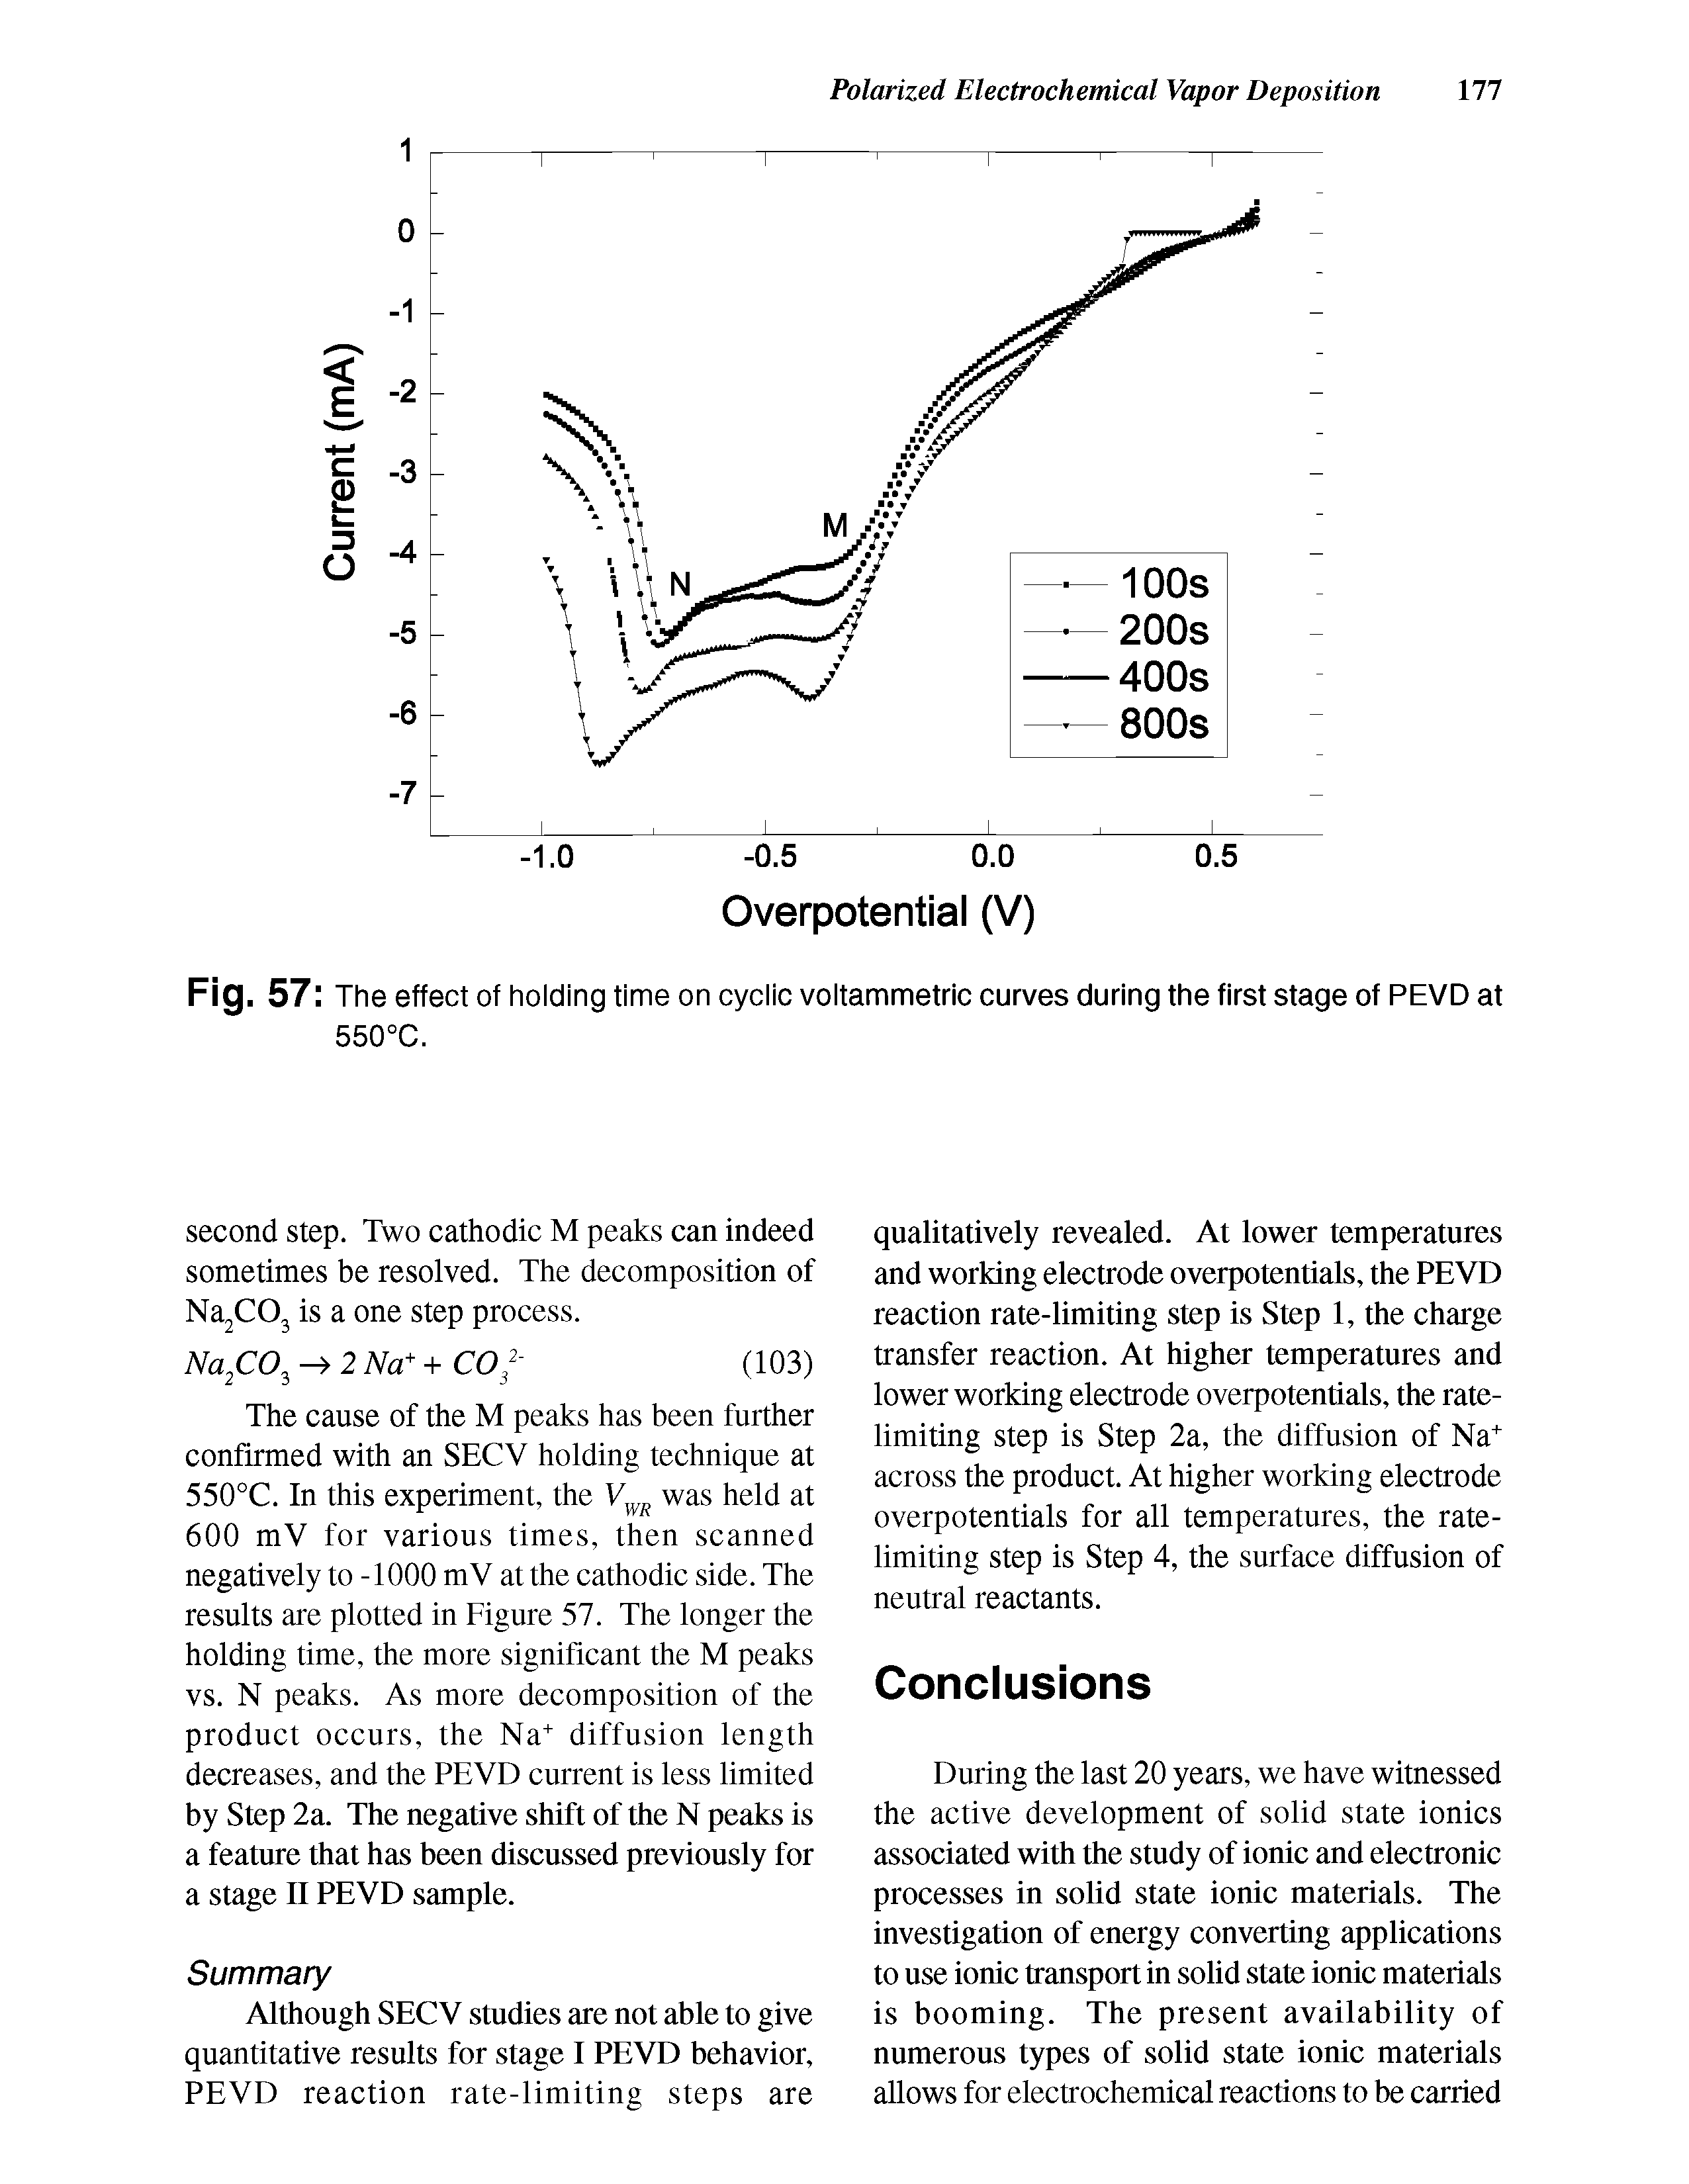 Fig. 57 The effect of holding time on cyclic voltammetric curves during the first stage of PEVD at 550°C.